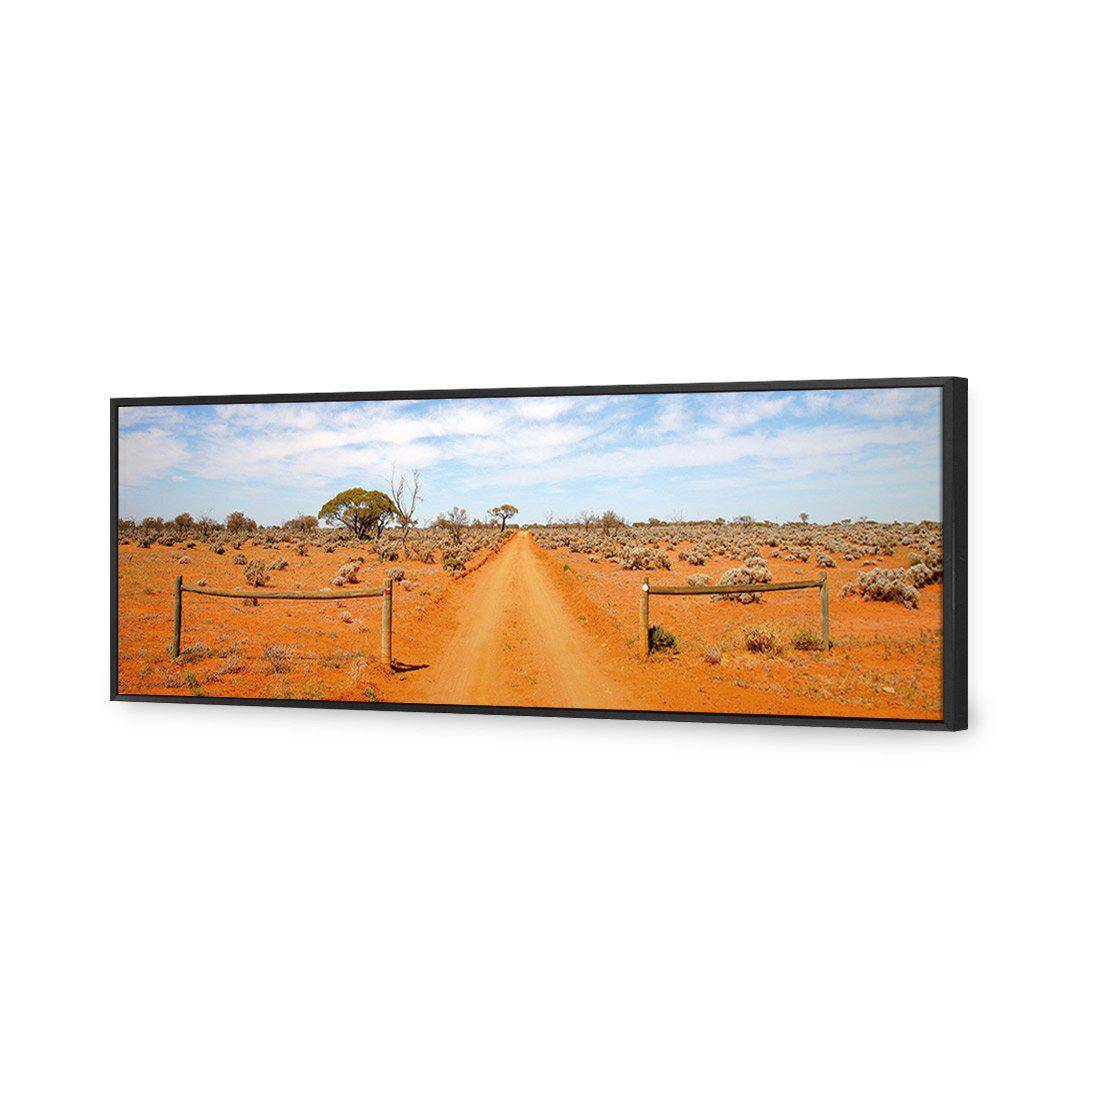 Outback Road Canvas Art-Canvas-Wall Art Designs-60x20cm-Canvas - Black Frame-Wall Art Designs